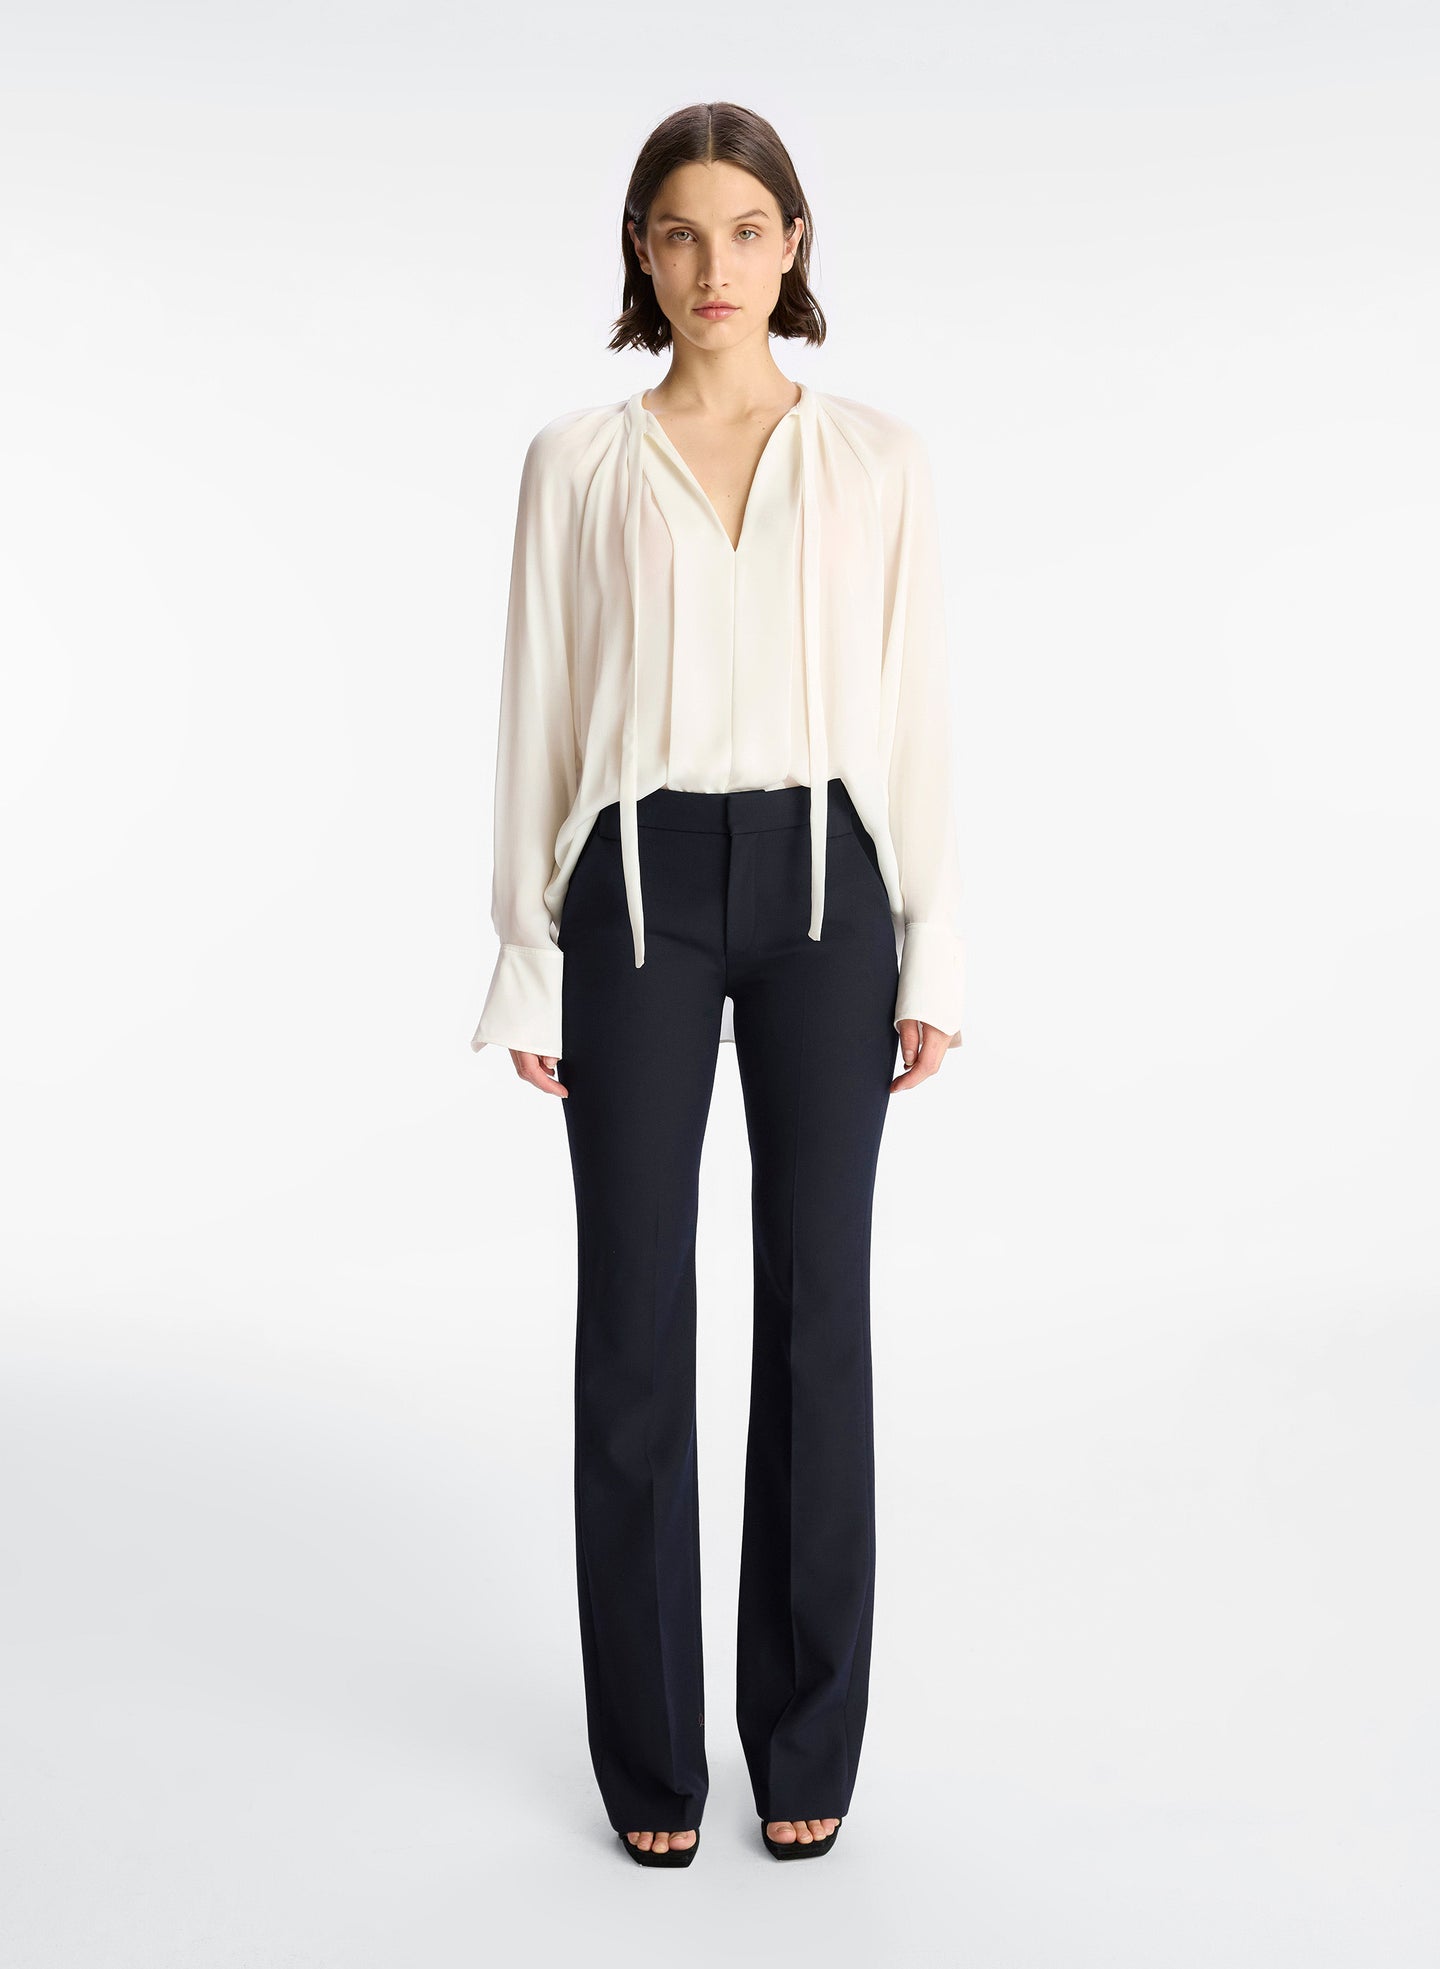 front view of woman wearing white long sleeve blouse and navy blue flared pants